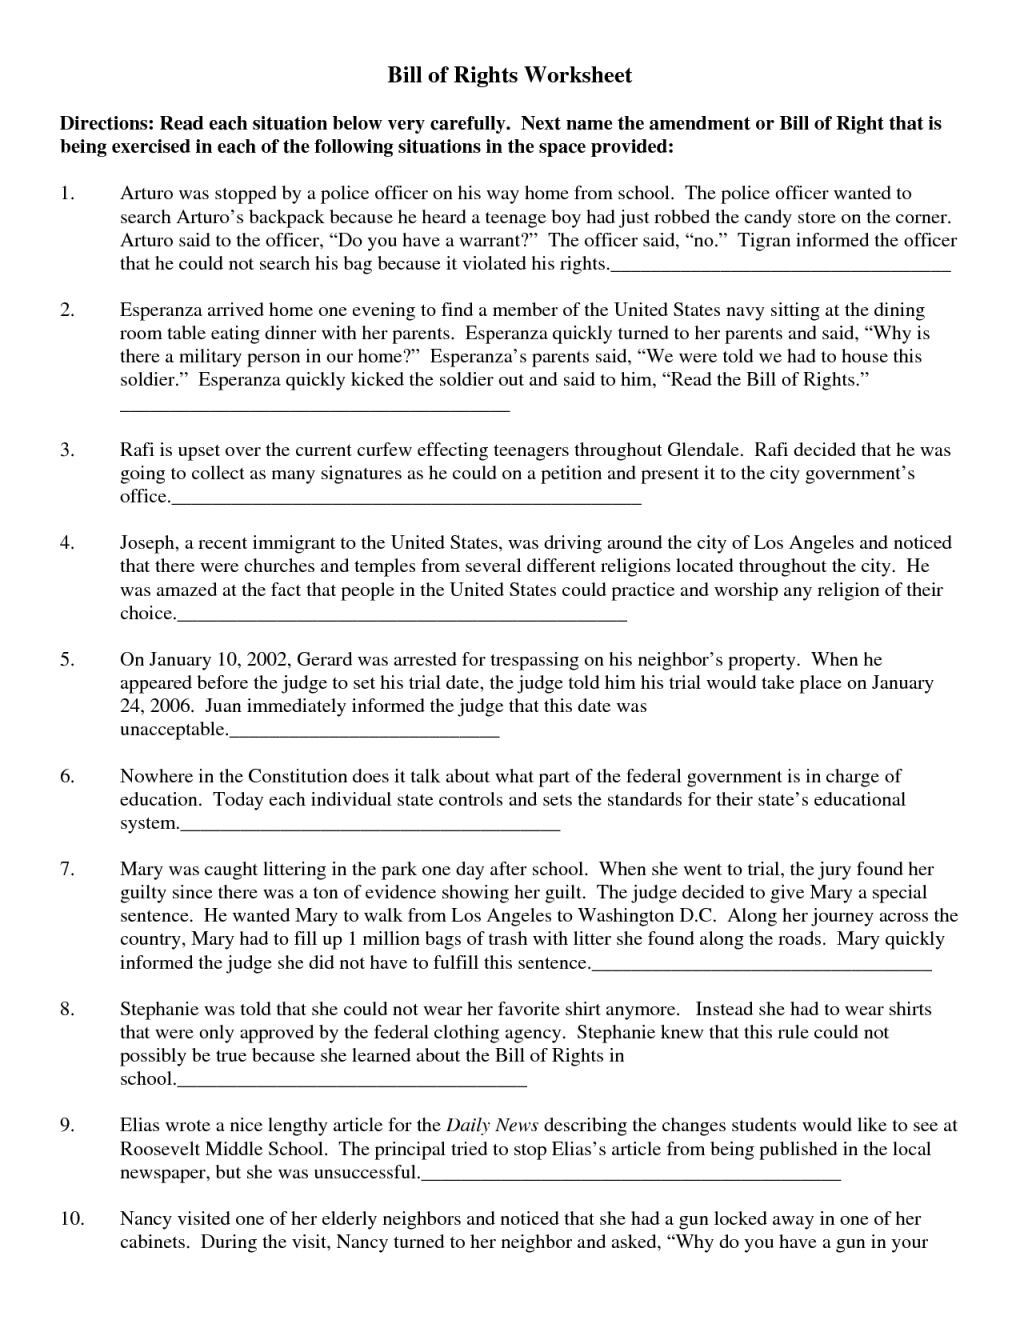 Rights and Responsibilities Worksheet Unique Icivics Bill Rights Worksheet